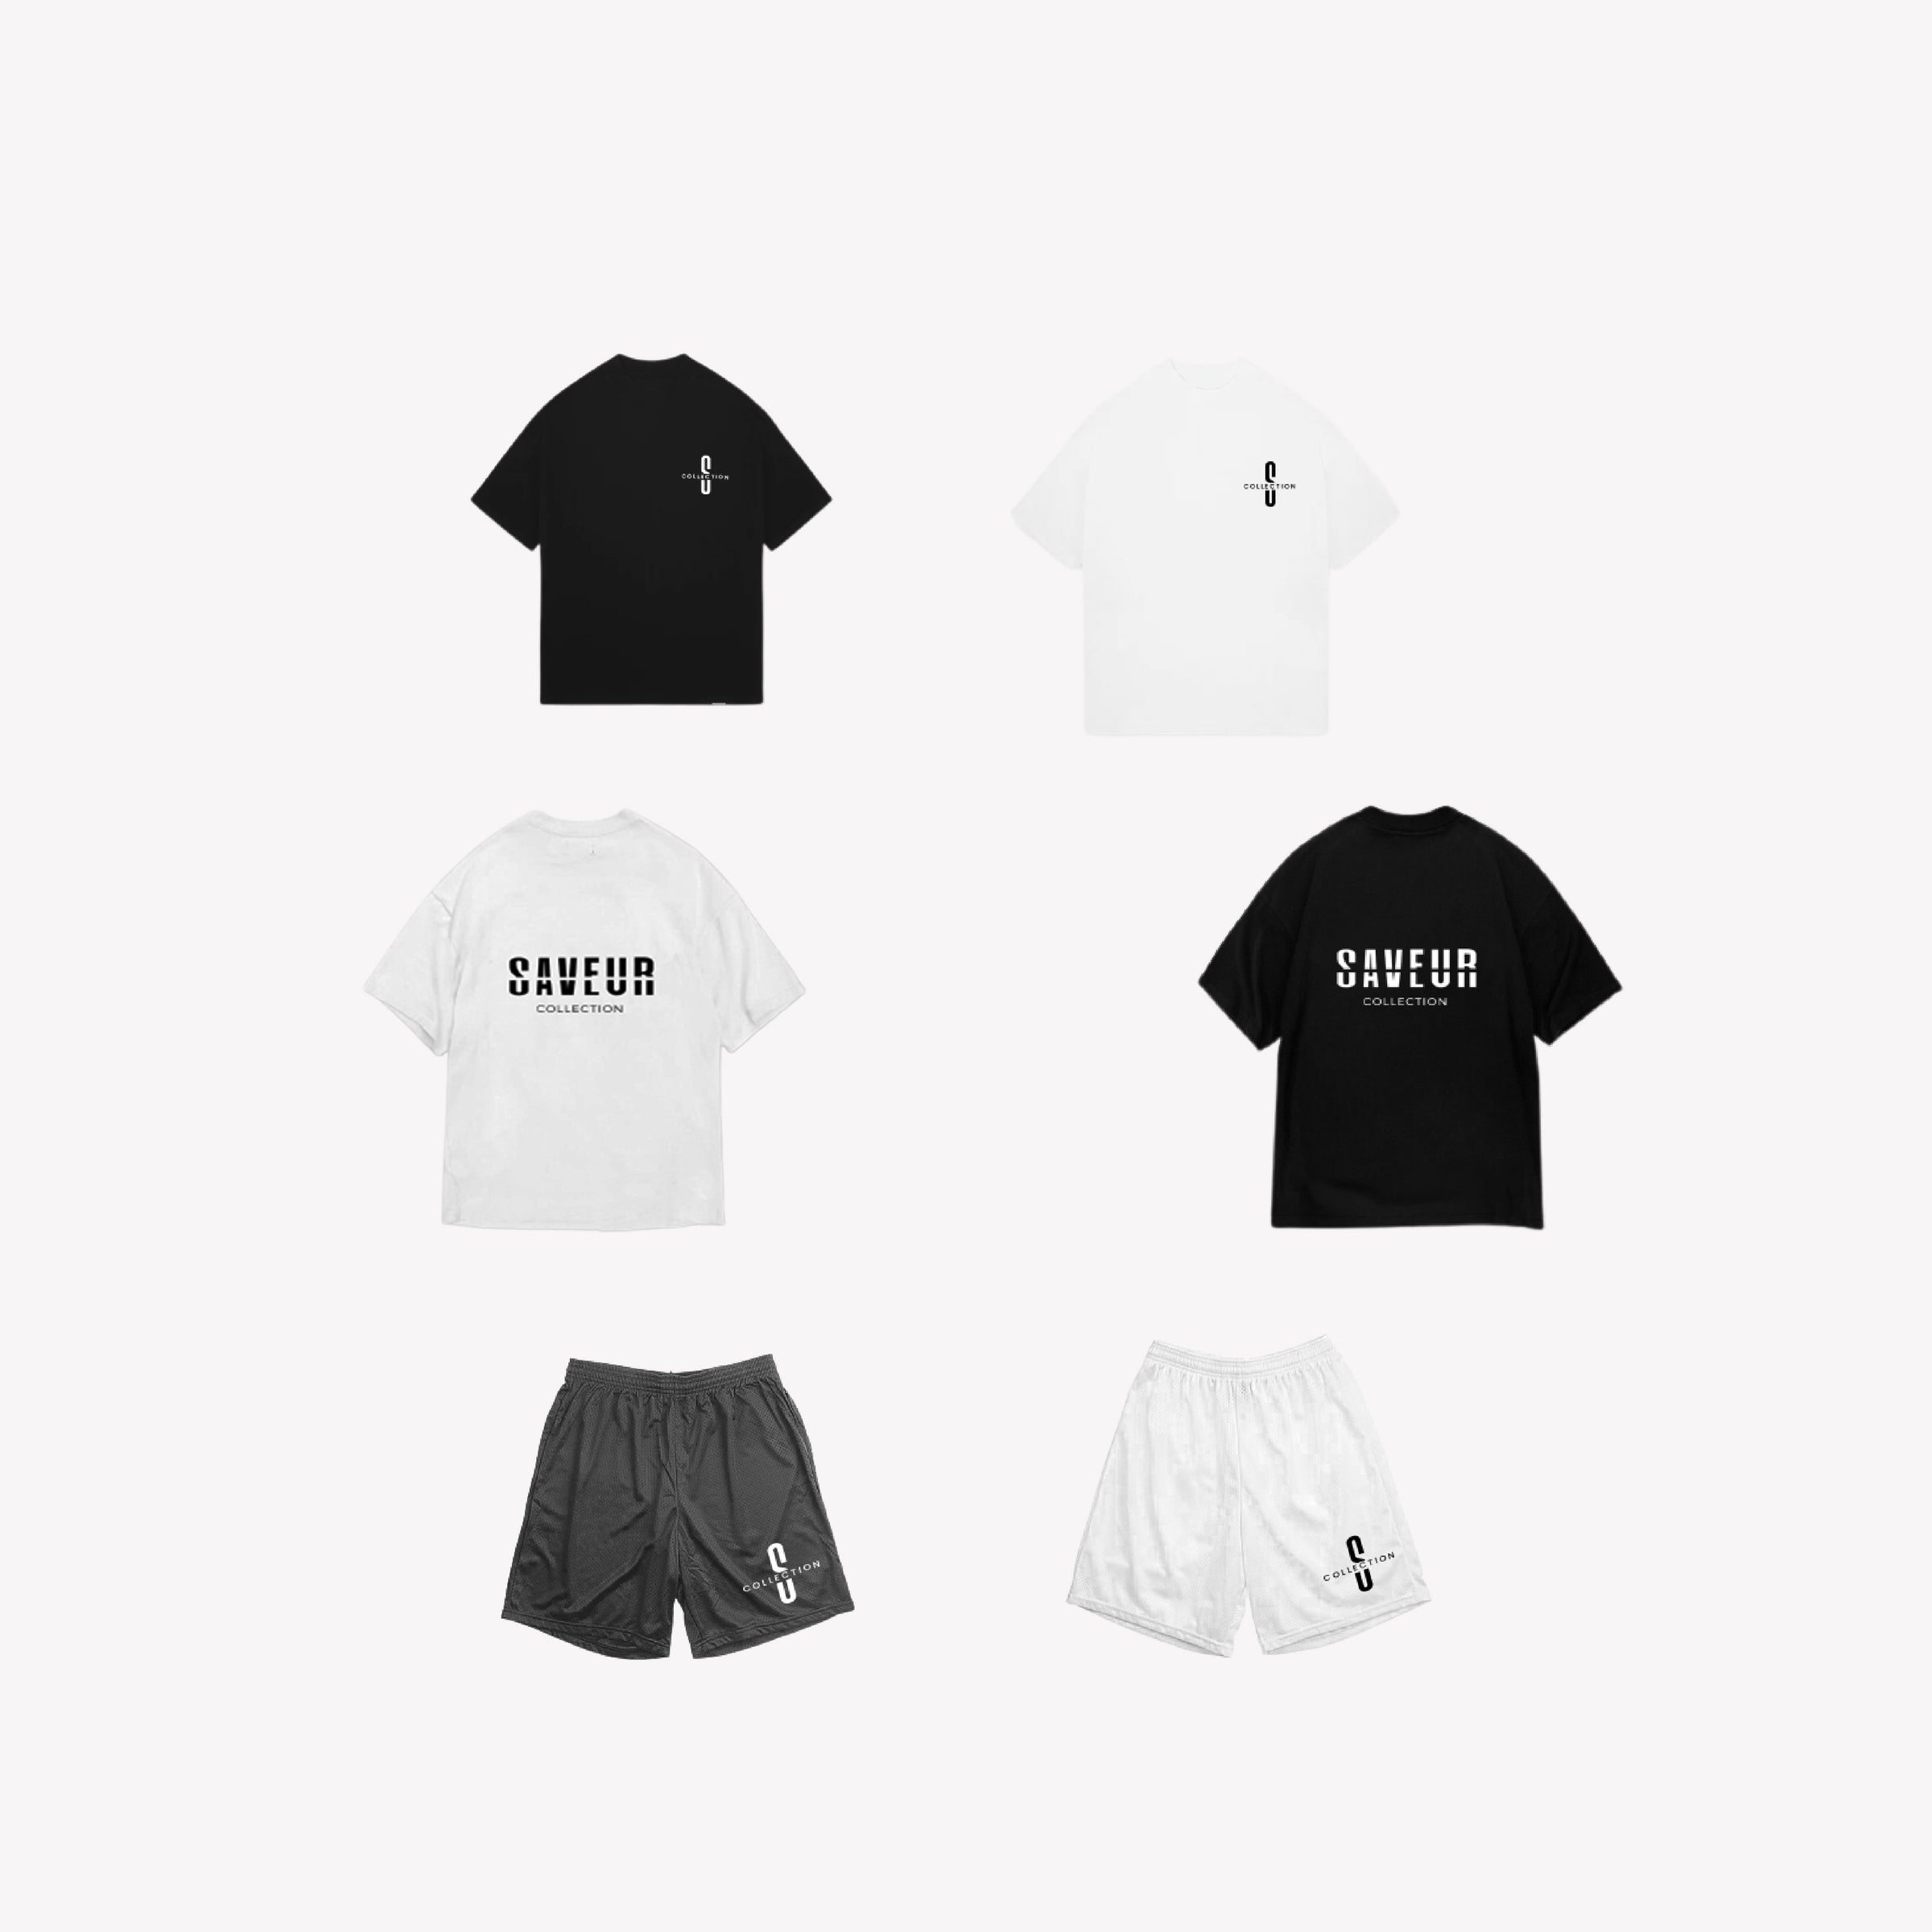 Saveur Collection | Luxury Streetwear Reimagined